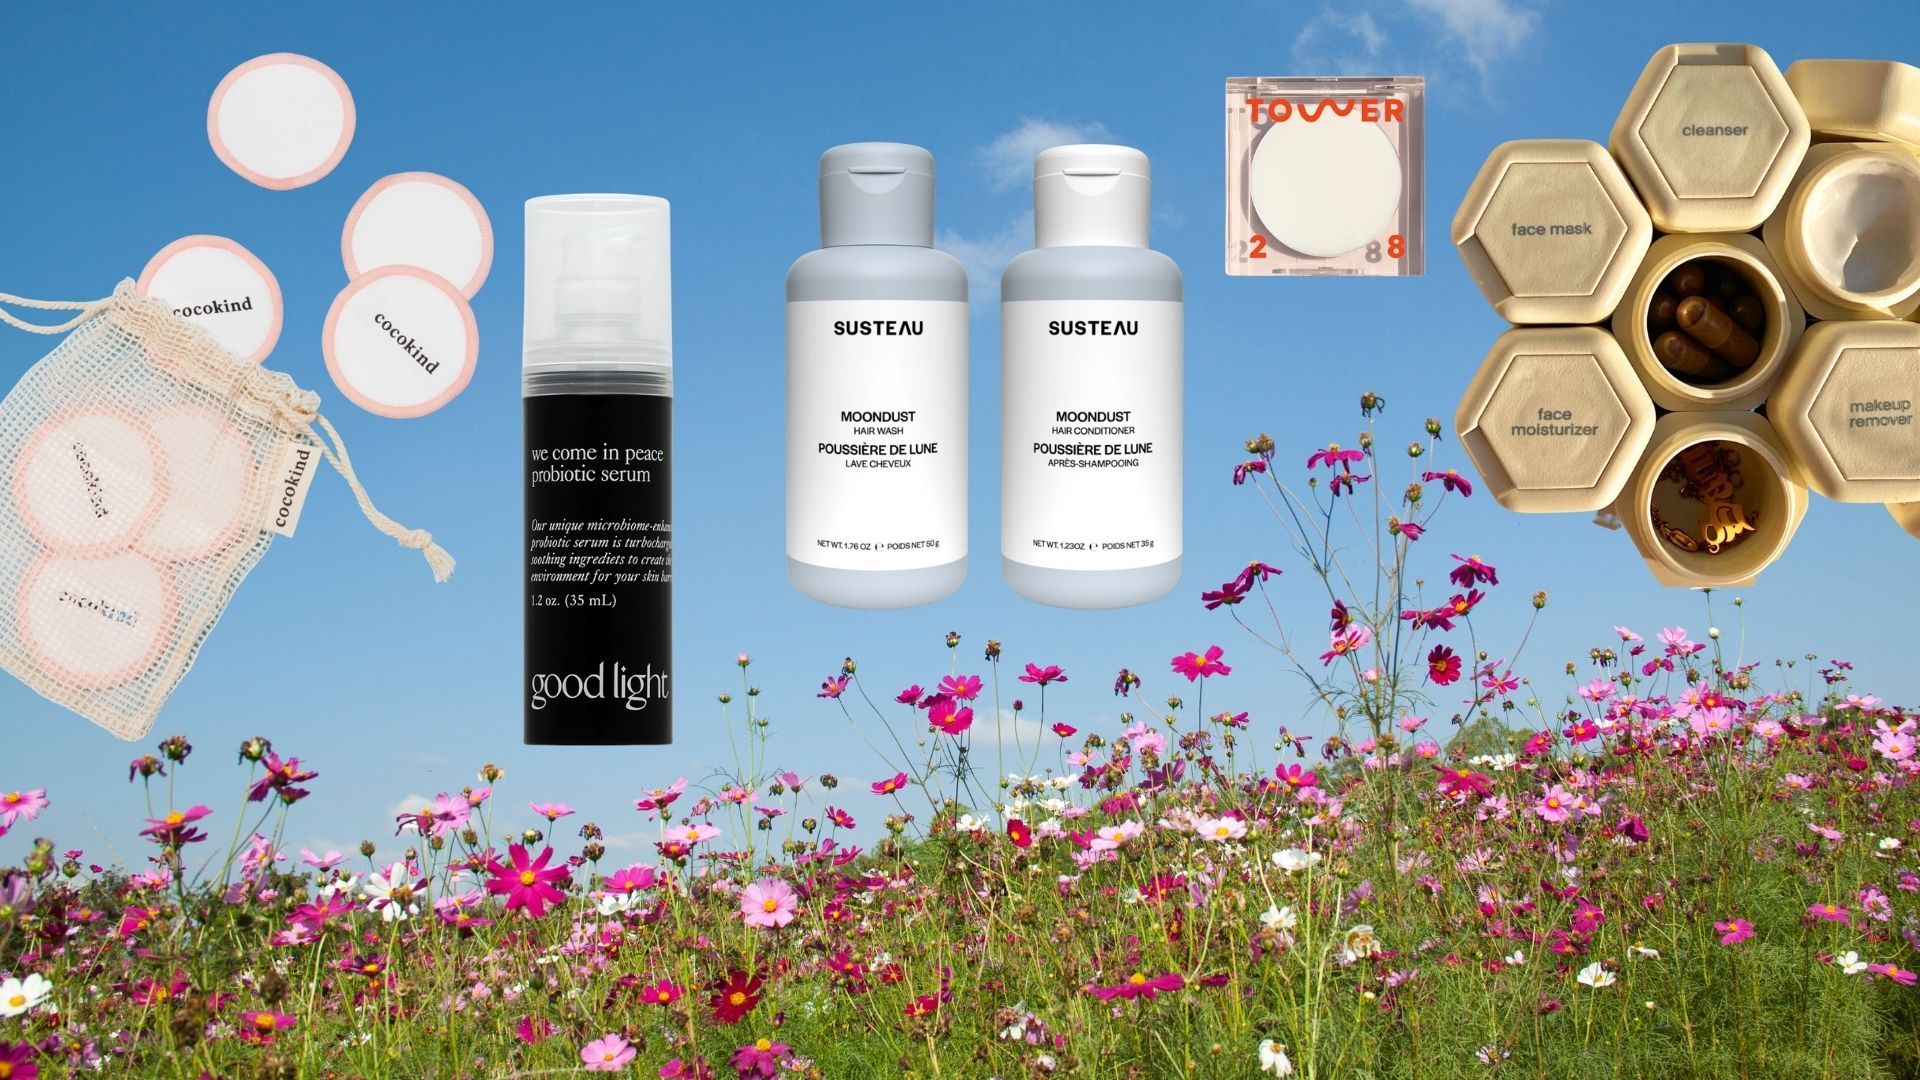 16 Beauty Products with Smart, Eco-Friendly Packaging - NewBeauty